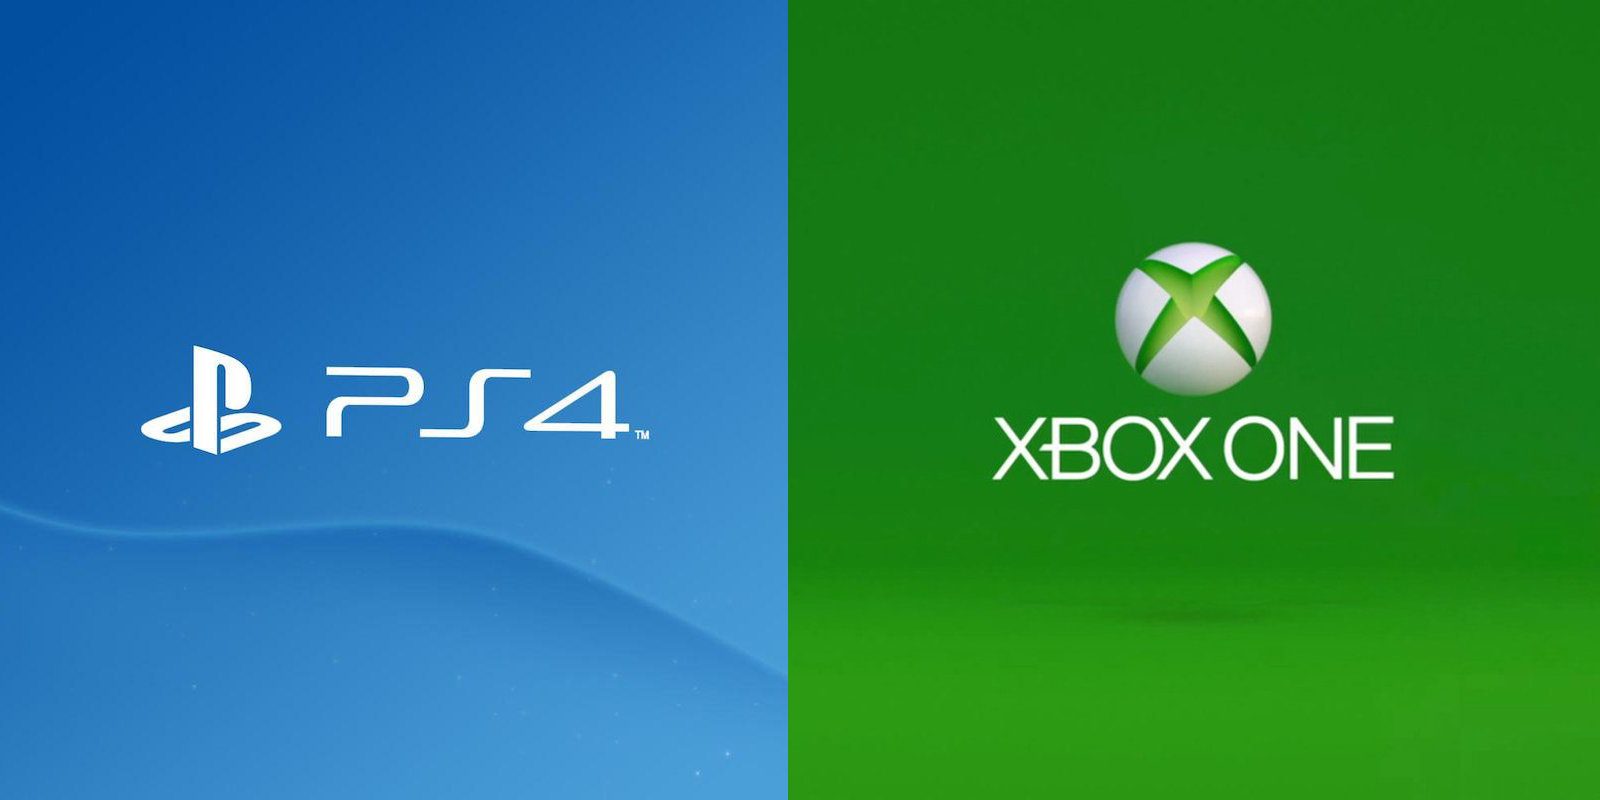 Microsoft Announce They Will Explore A New Strategic Partnership With Sony Going Forward